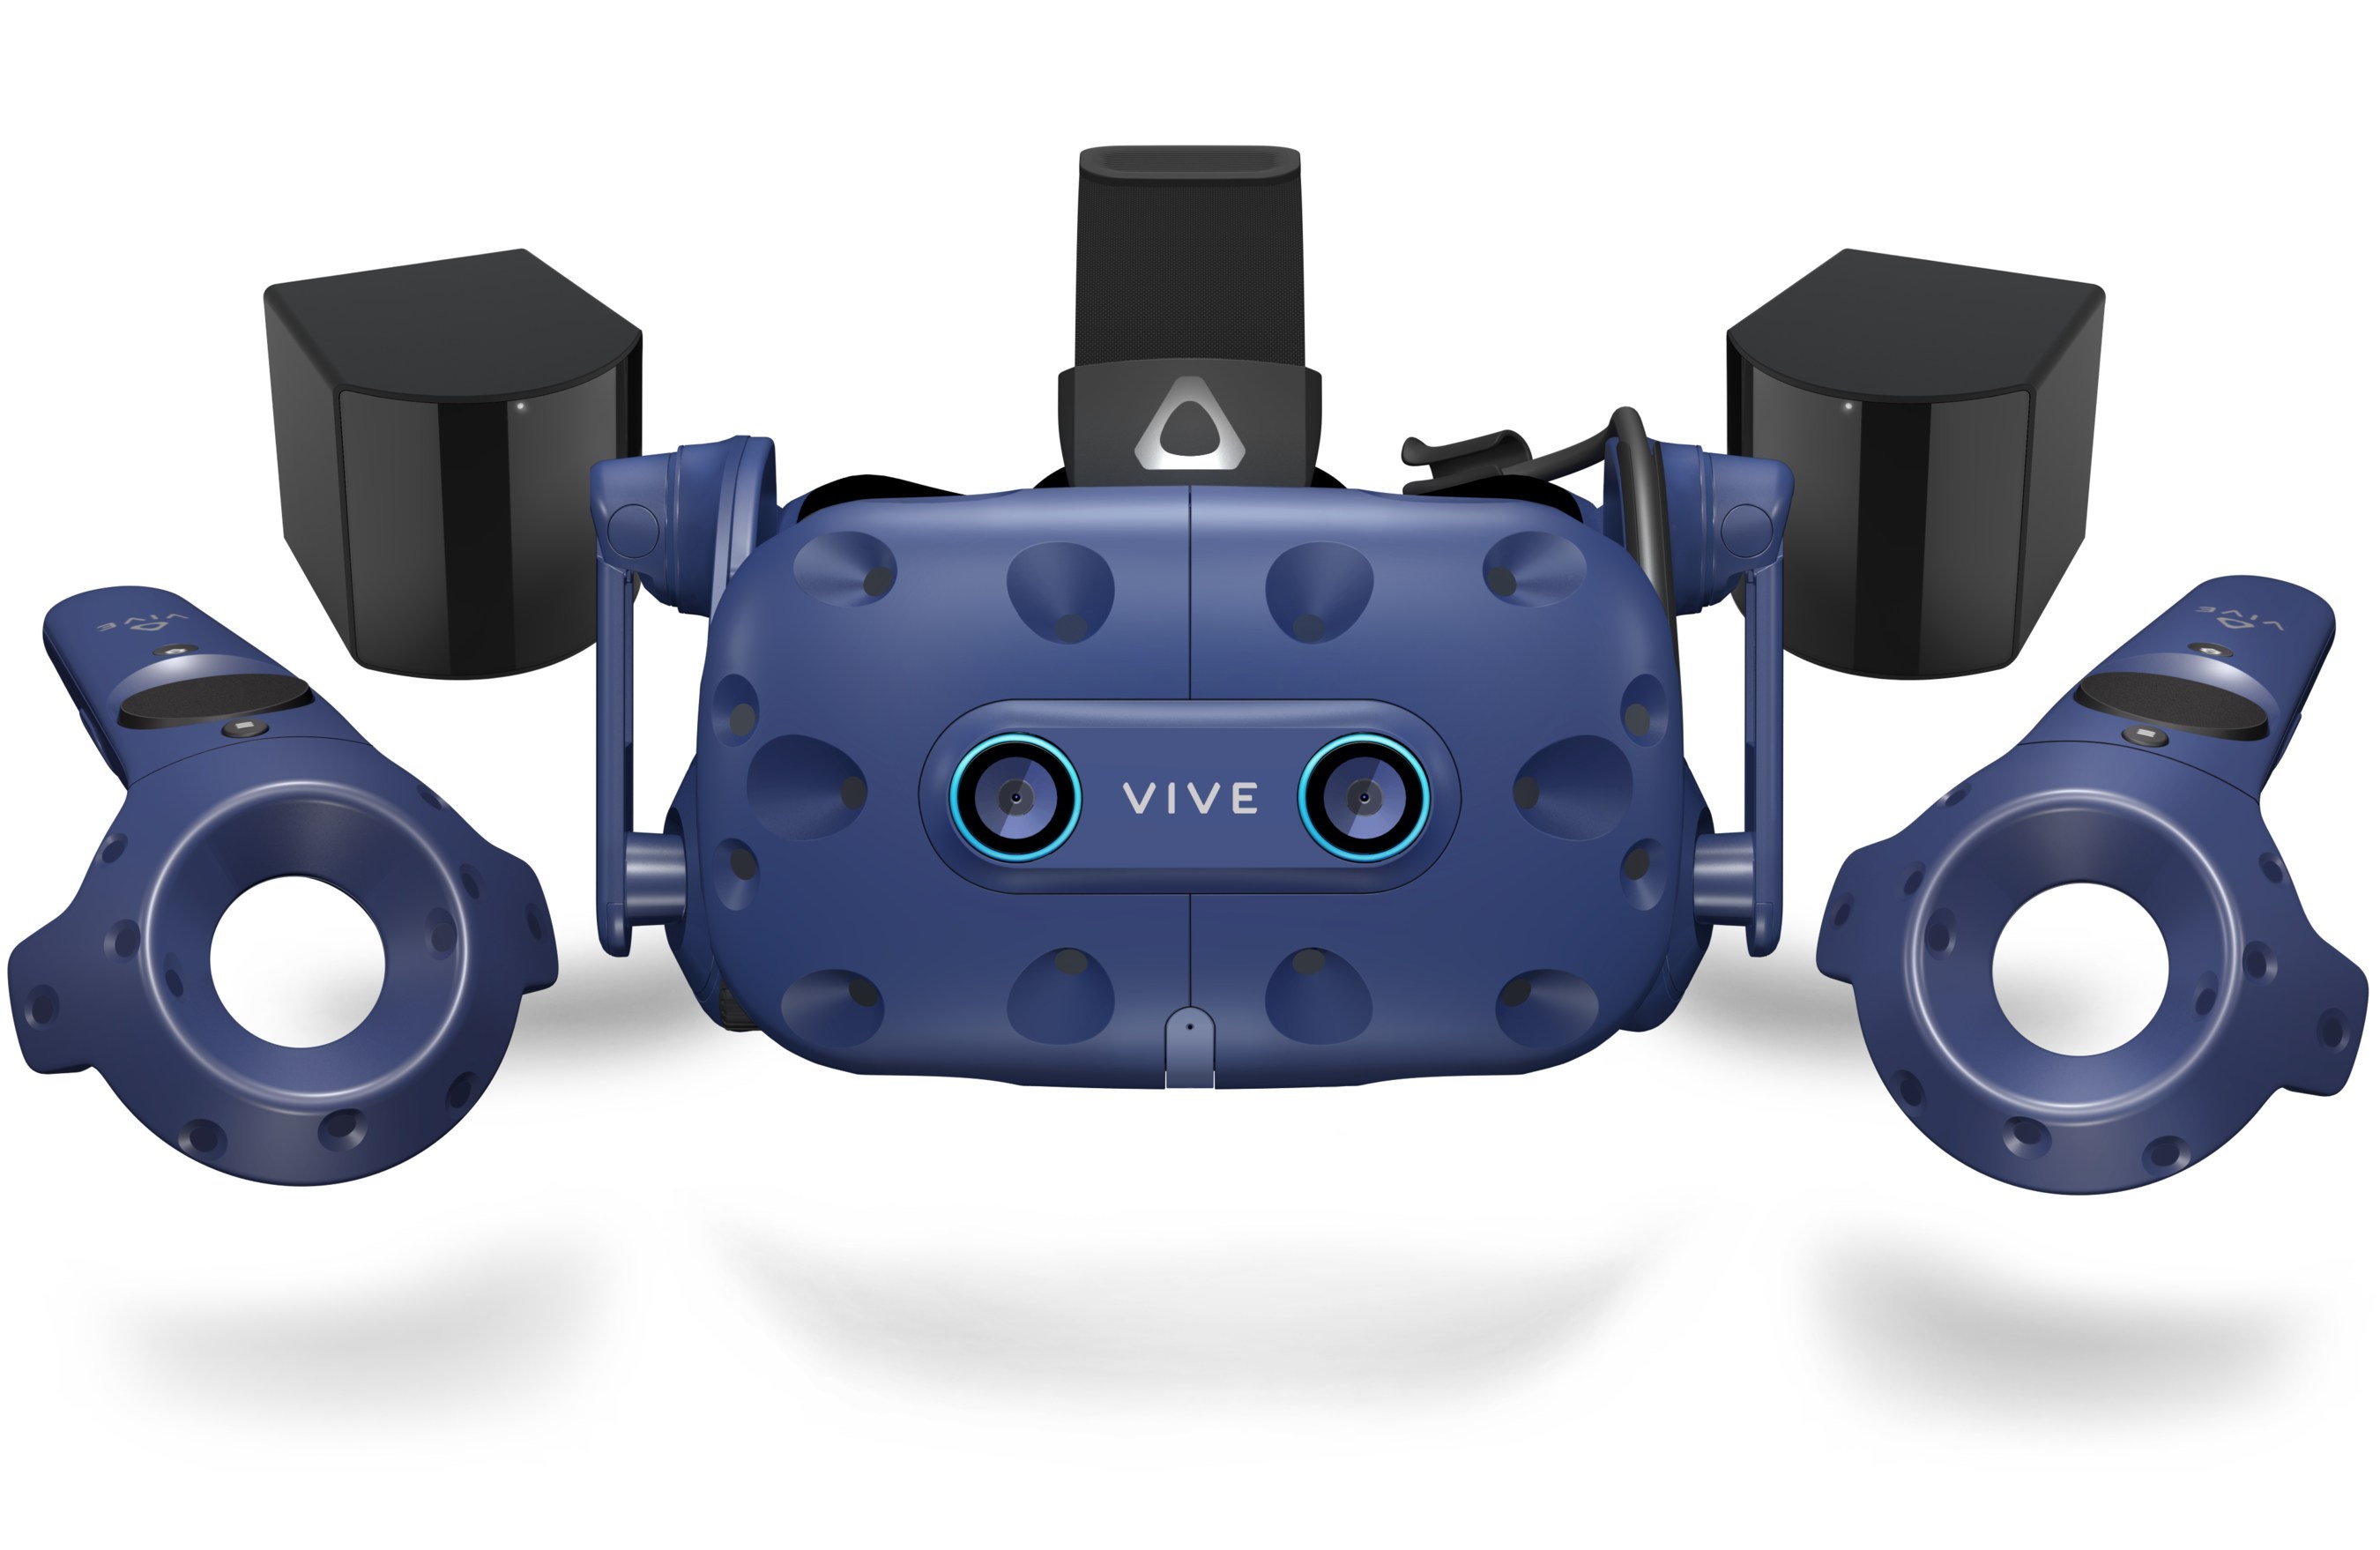 VIVE Pro Eye Launches Today In North America, Setting A New Standard For Enterprise Virtual Reality